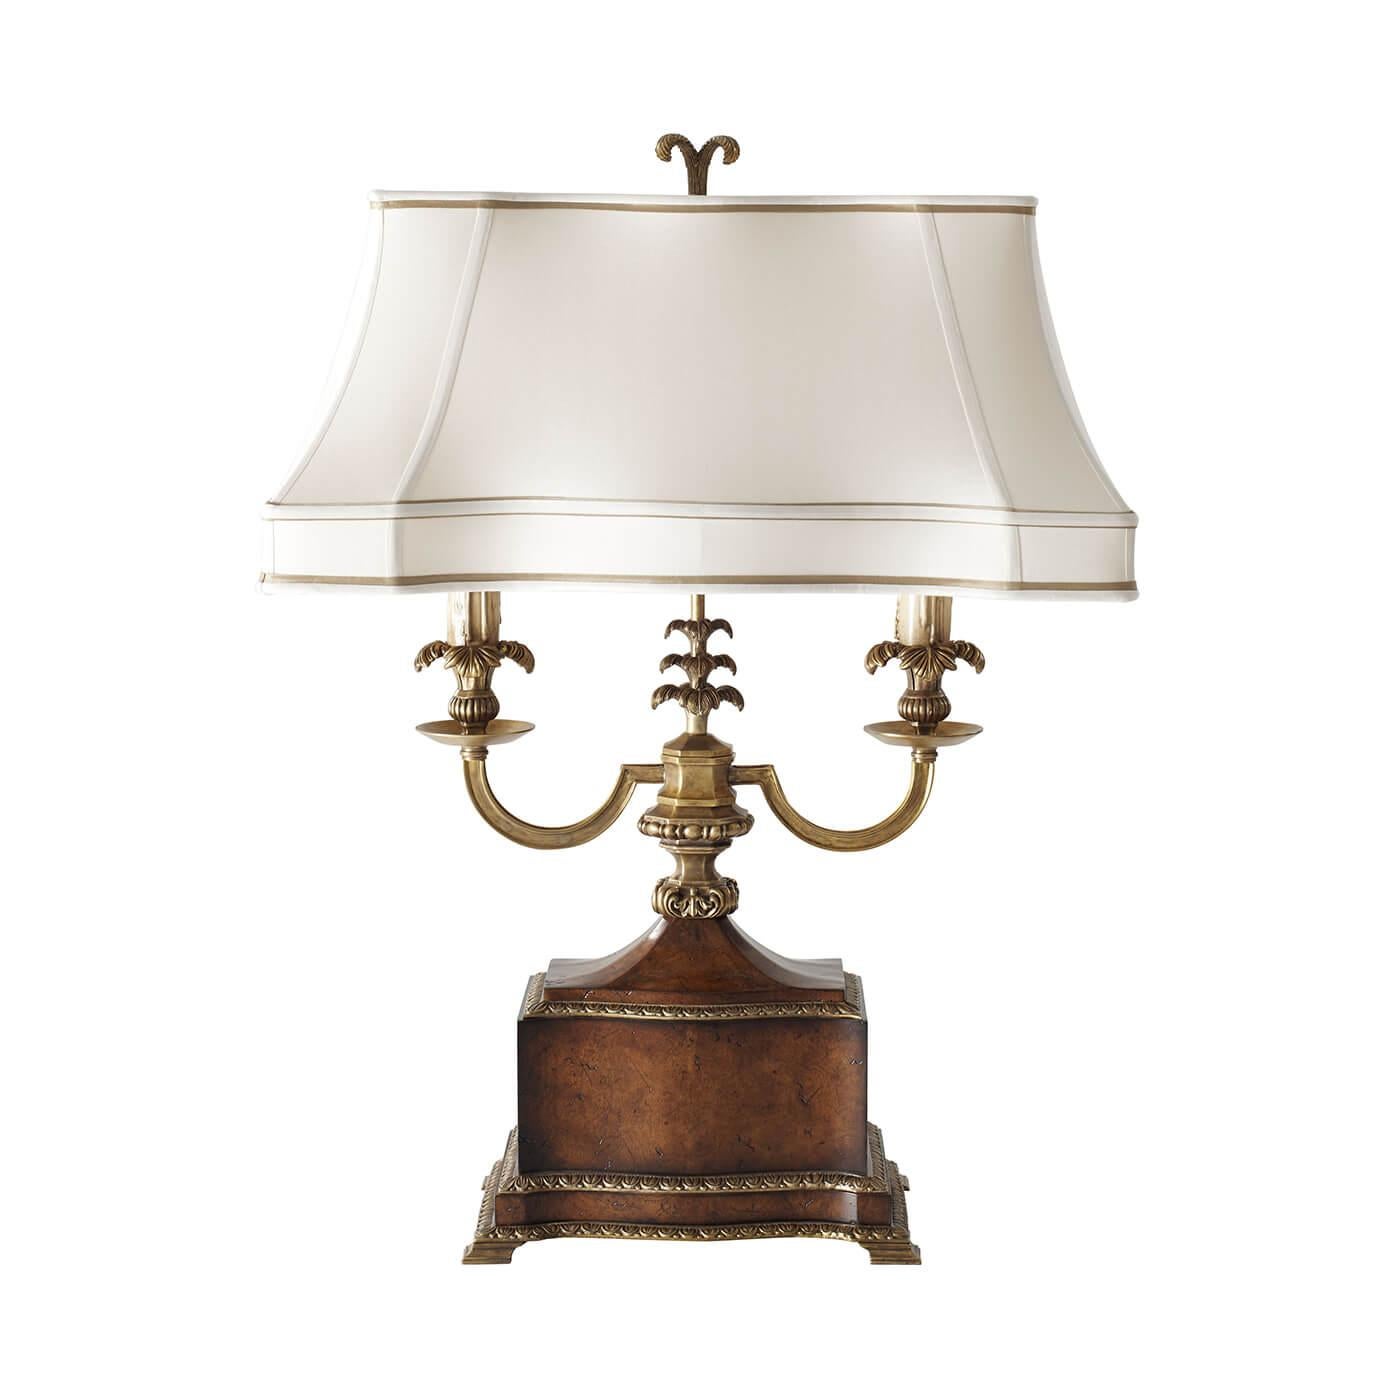 A French Louis XVI style pollard burl and finely cast brass table lamp, the twin light arms above a shaped base with brass mounts surmounted by hand-sewn silk shade. 

Dimensions: 22